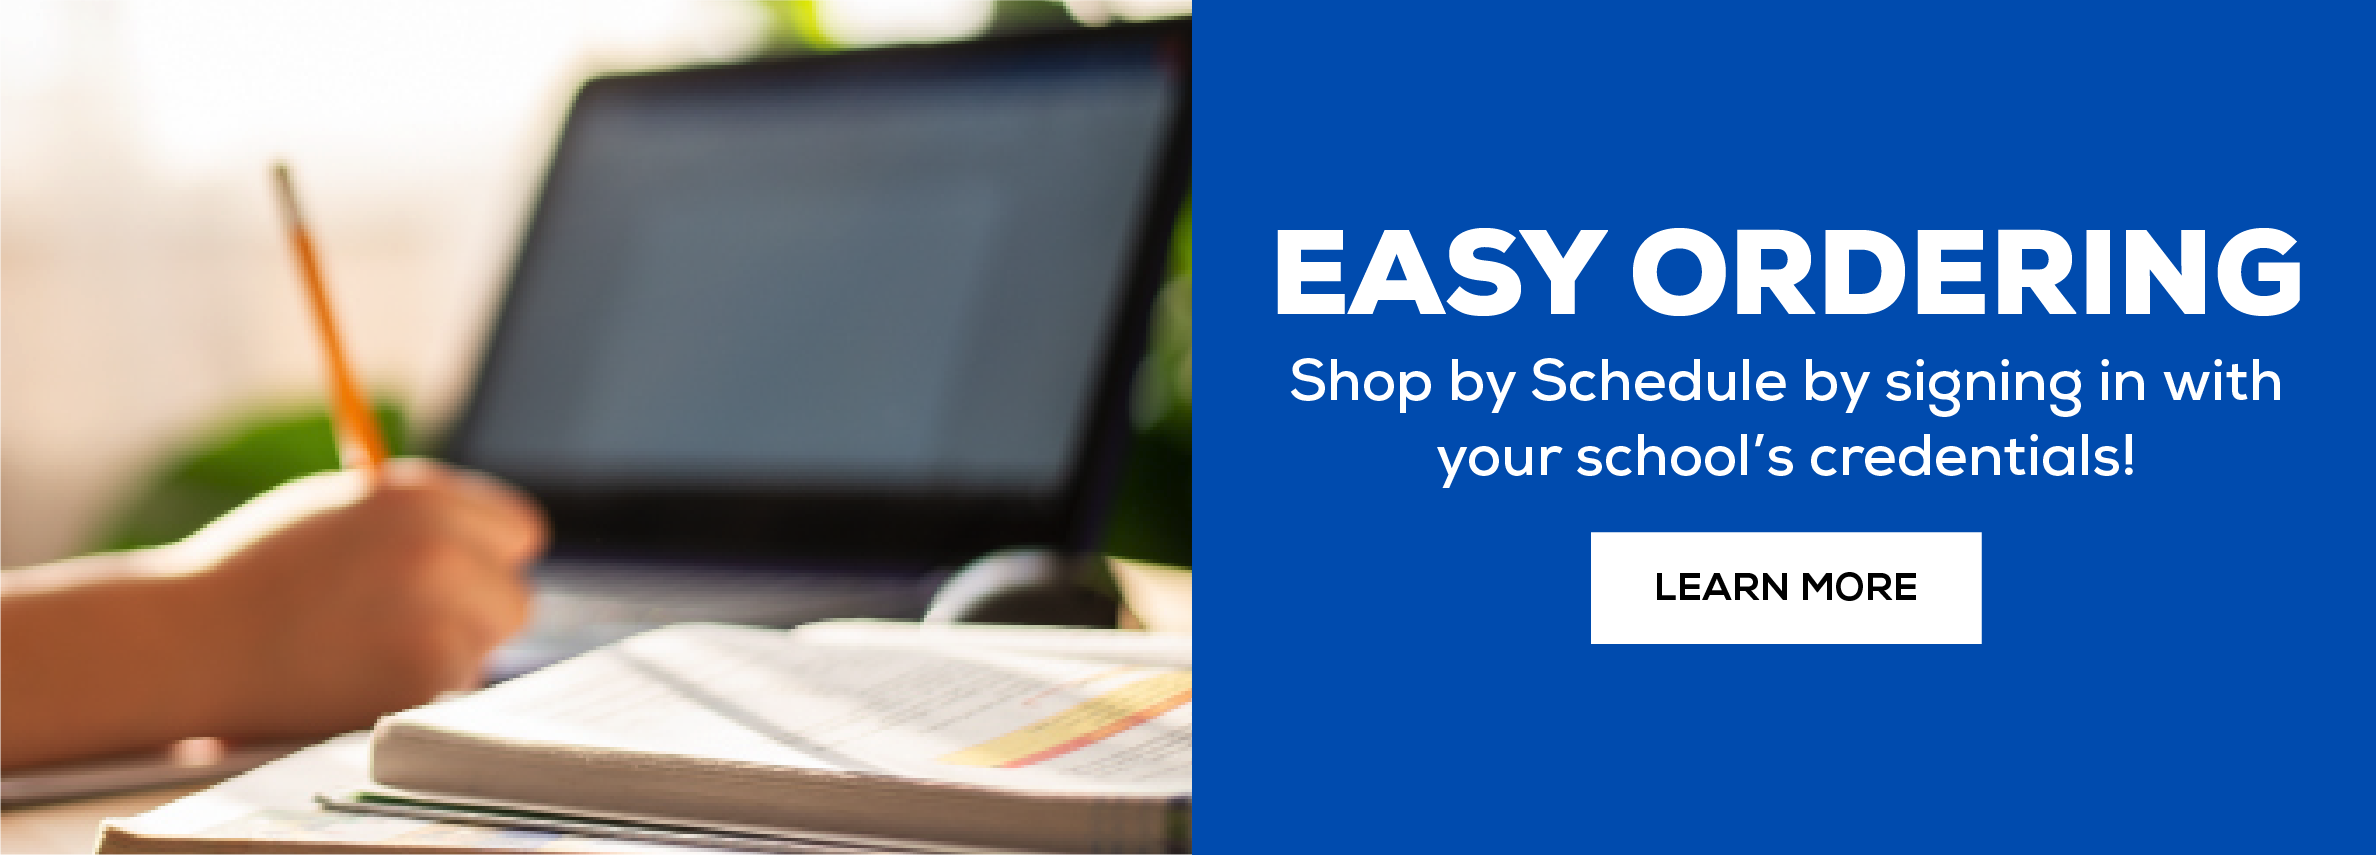 Easy ordering. Shop by schedule by signing in with your school's credentials! Learn More